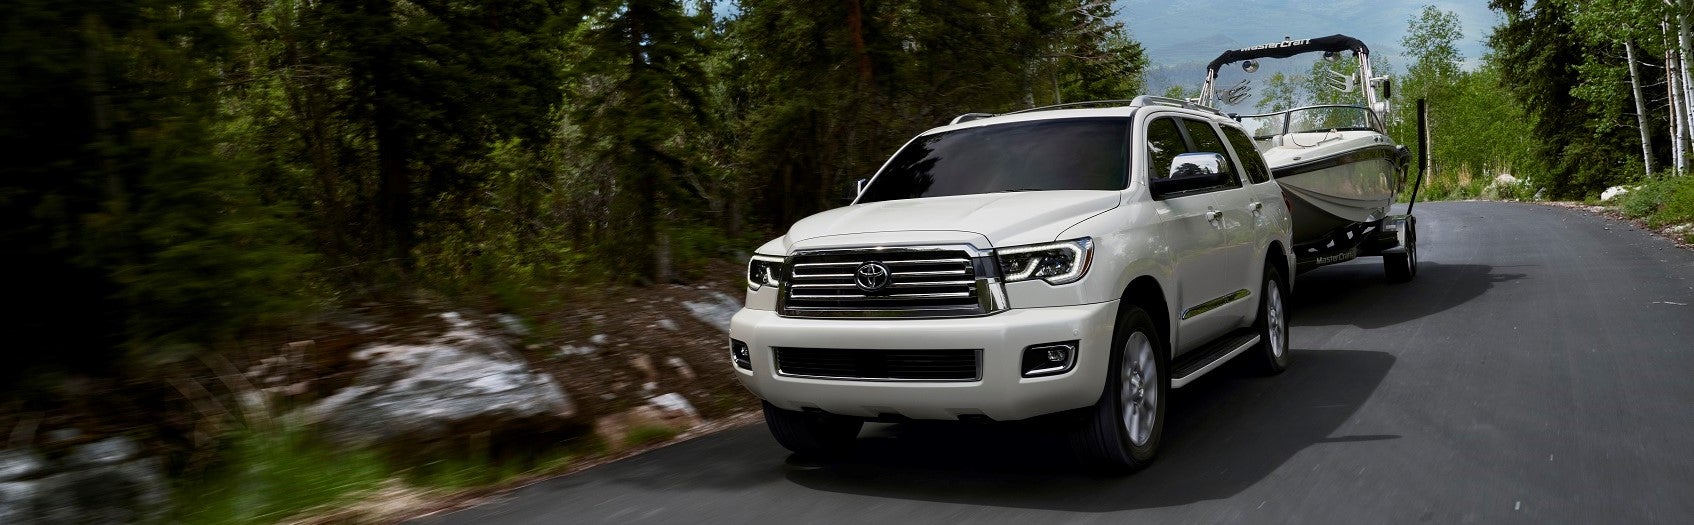 2020 Sequoia Review 